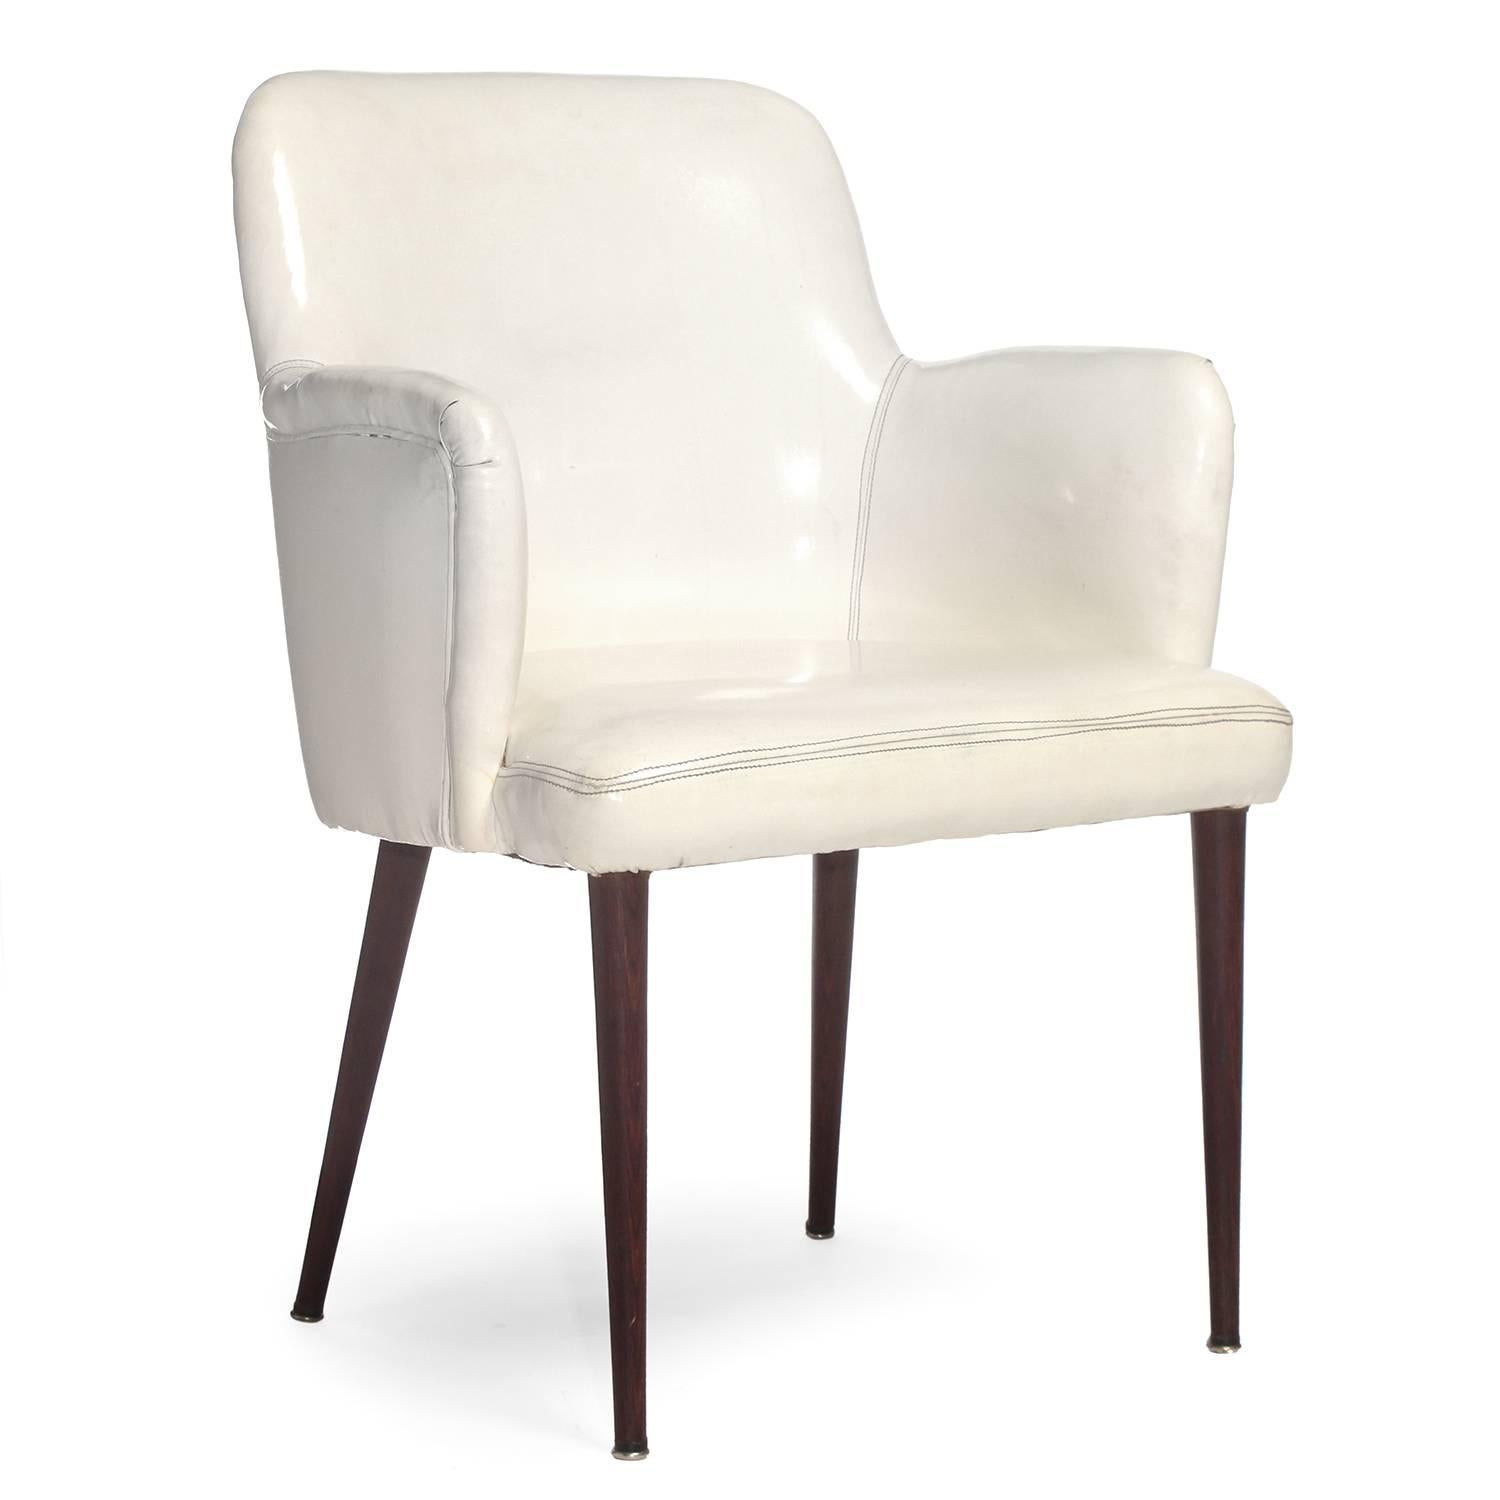 A tailored armchair having turned rosewood legs and retaining its original form-fitted white vinyl upholstery.